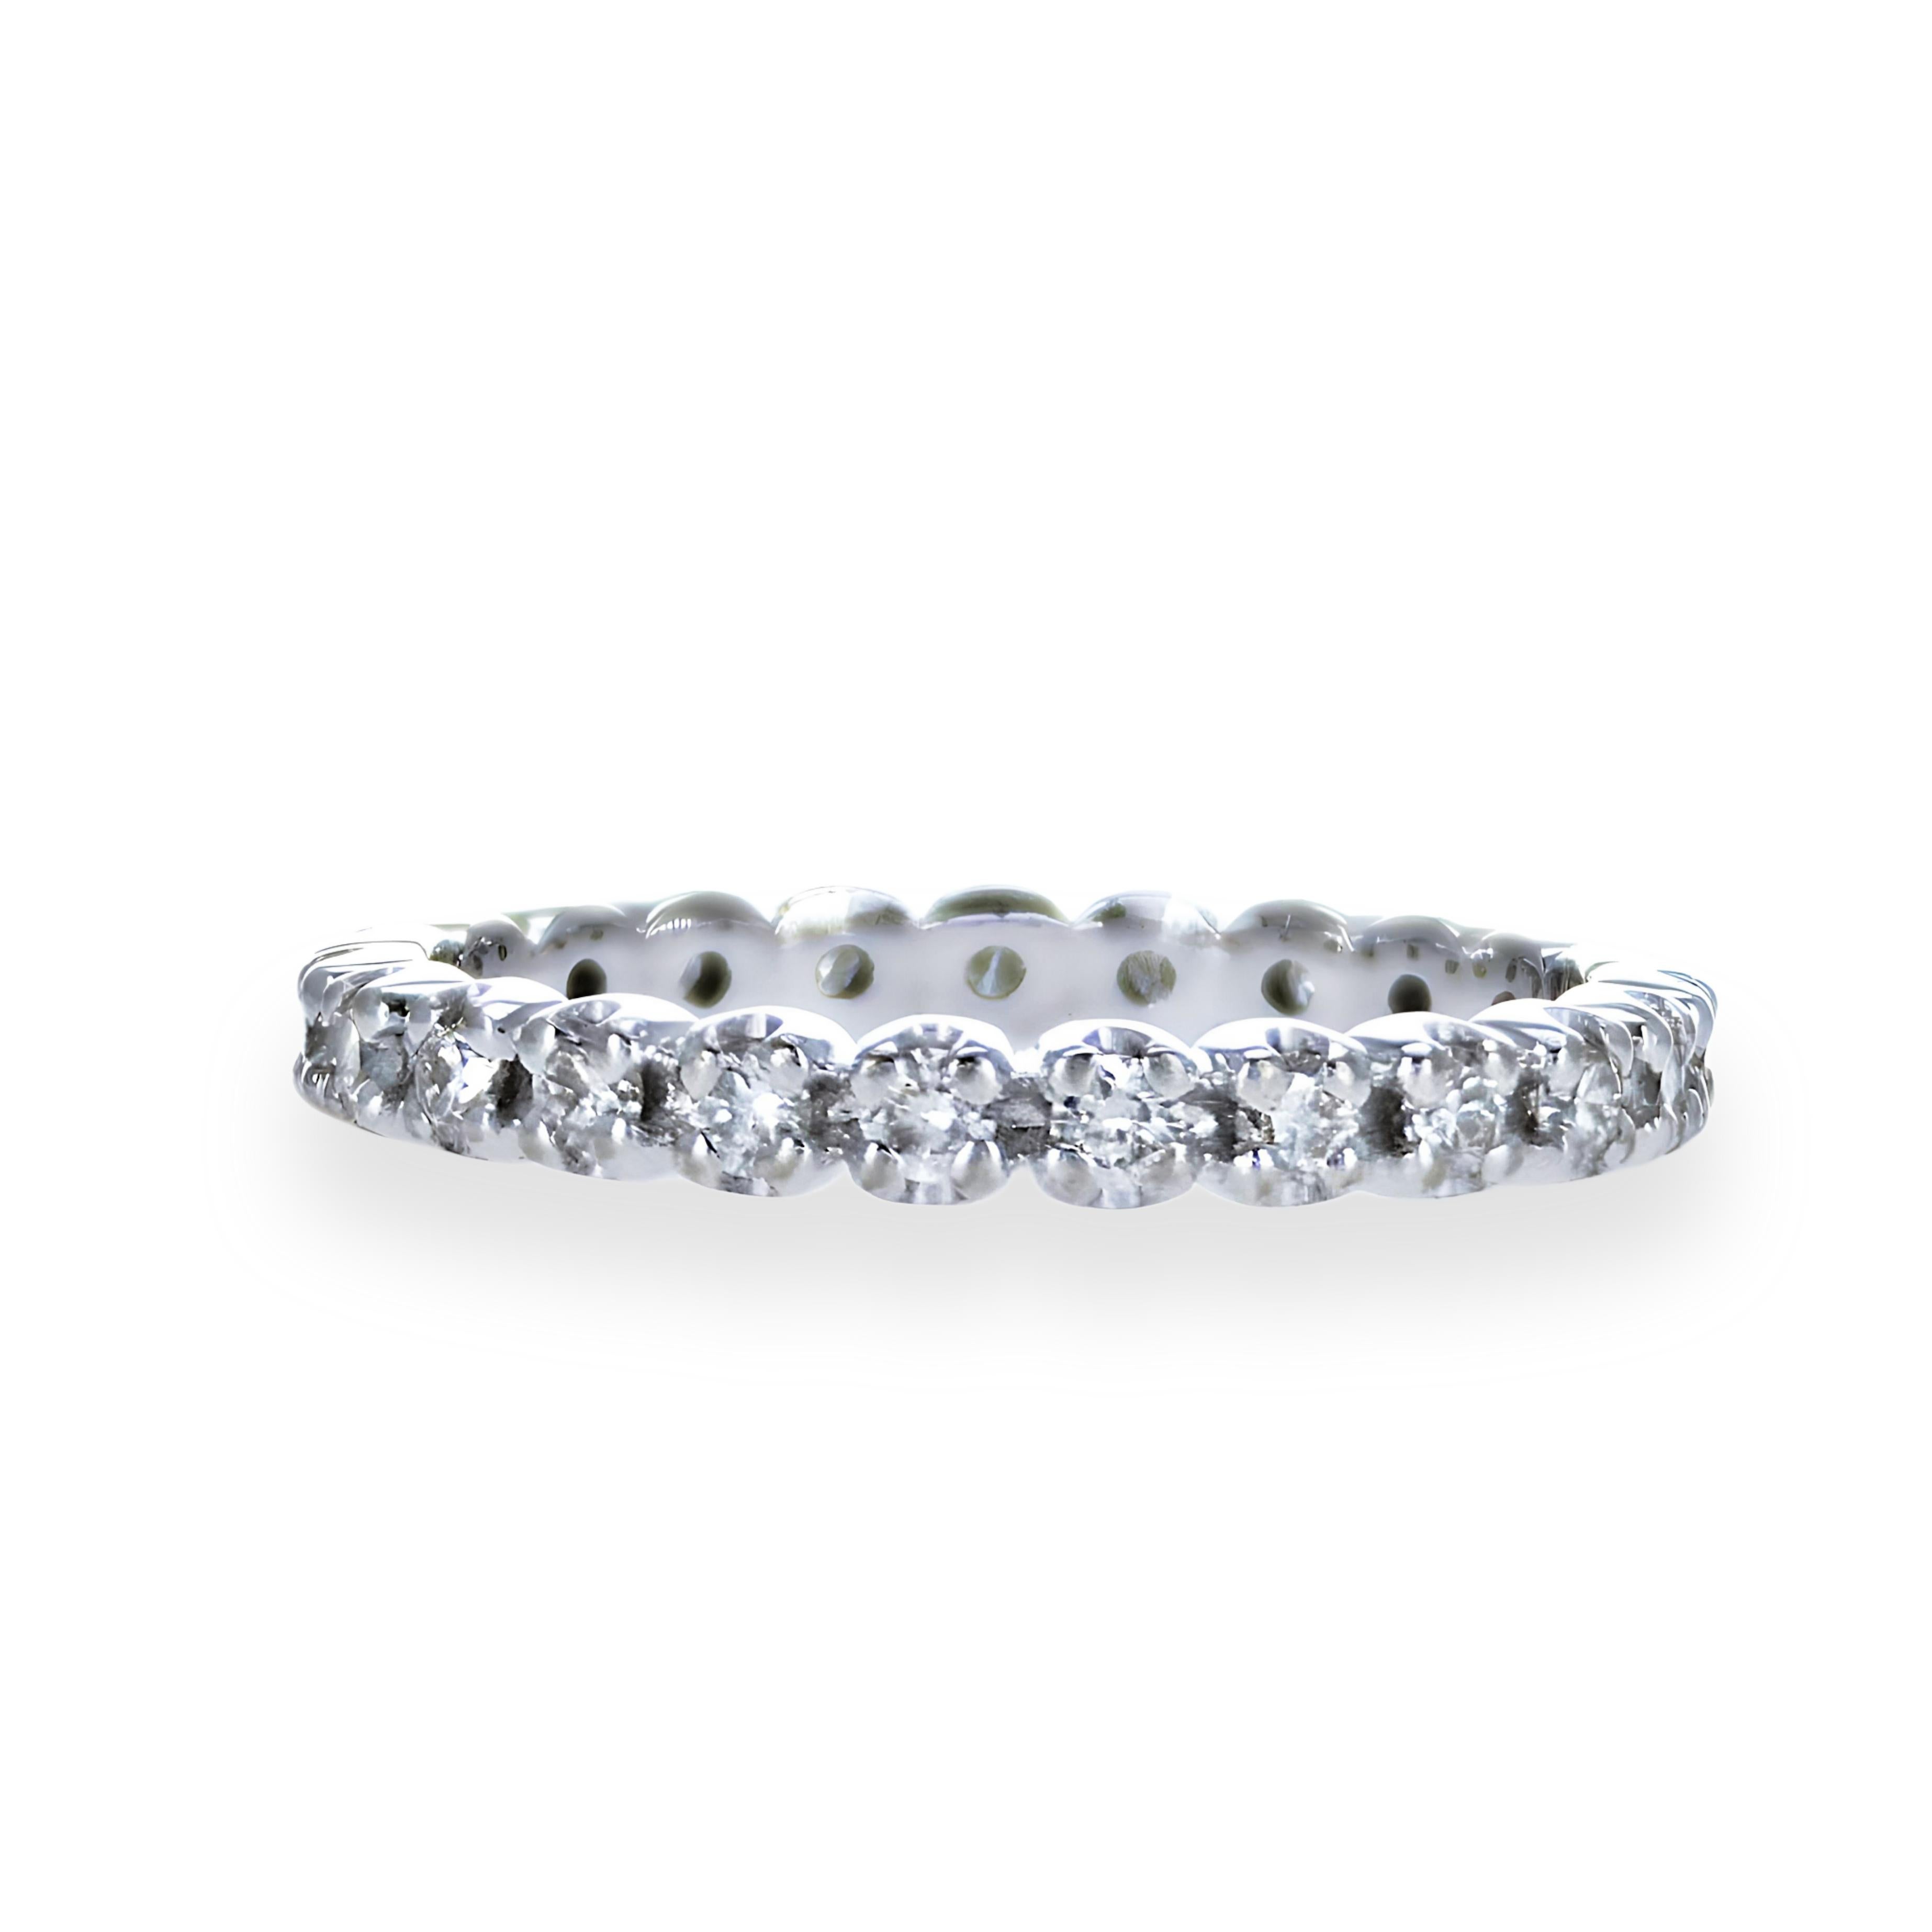 Exquisite 14K White Gold 0.72Ct Natural Round Diamonds Eternity Ring

Product Description:

Embrace timeless elegance with our sublime 14K White Gold 0.72Ct Natural Round Diamonds Eternity Ring. This exquisite piece is the epitome of luxury and